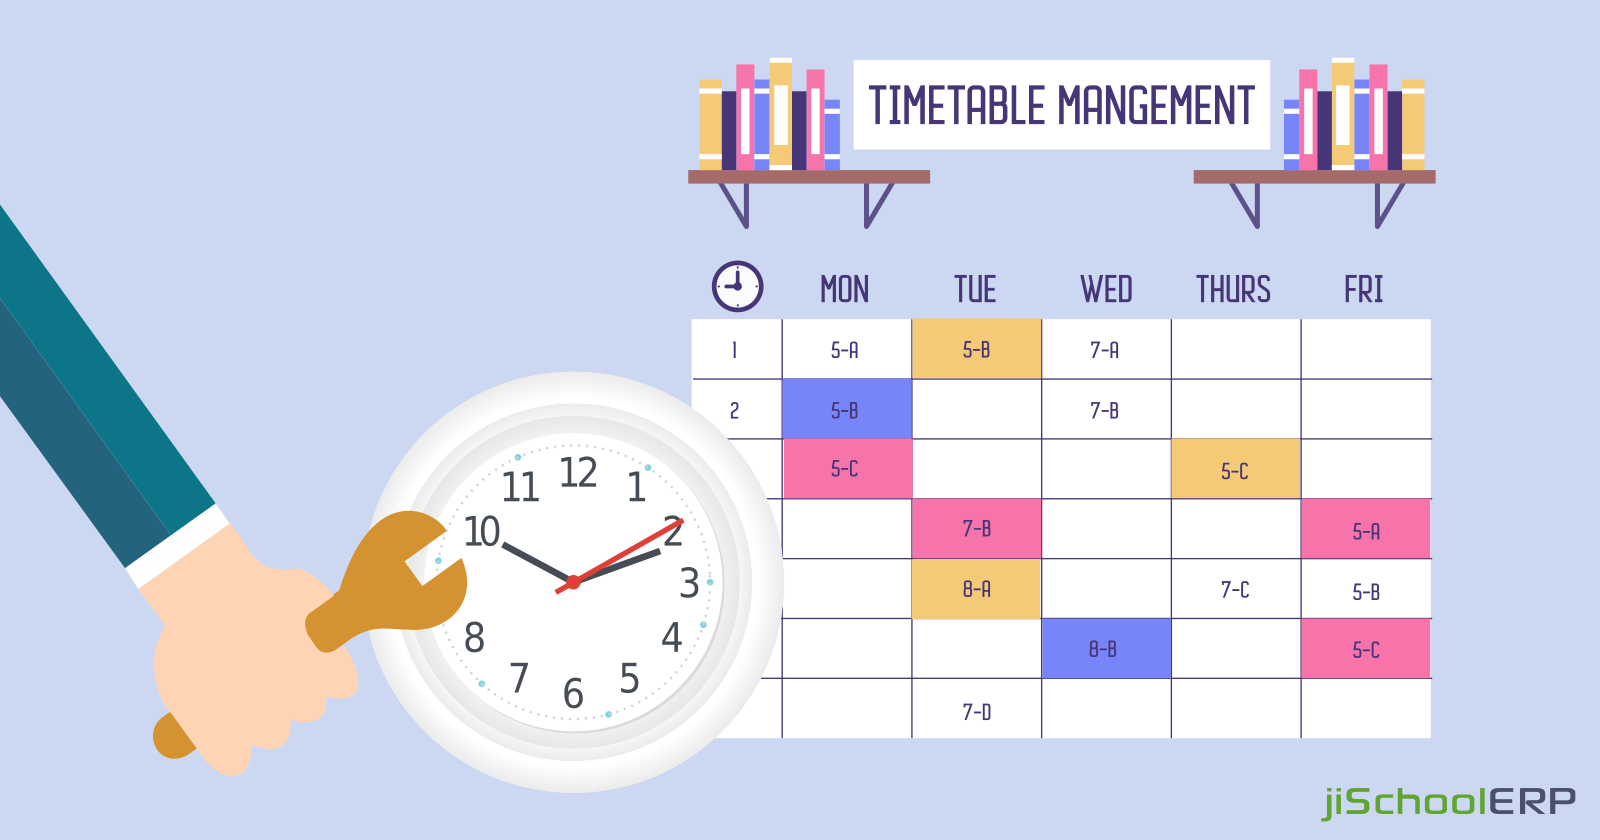 Manage your School Timetables the Right Way!